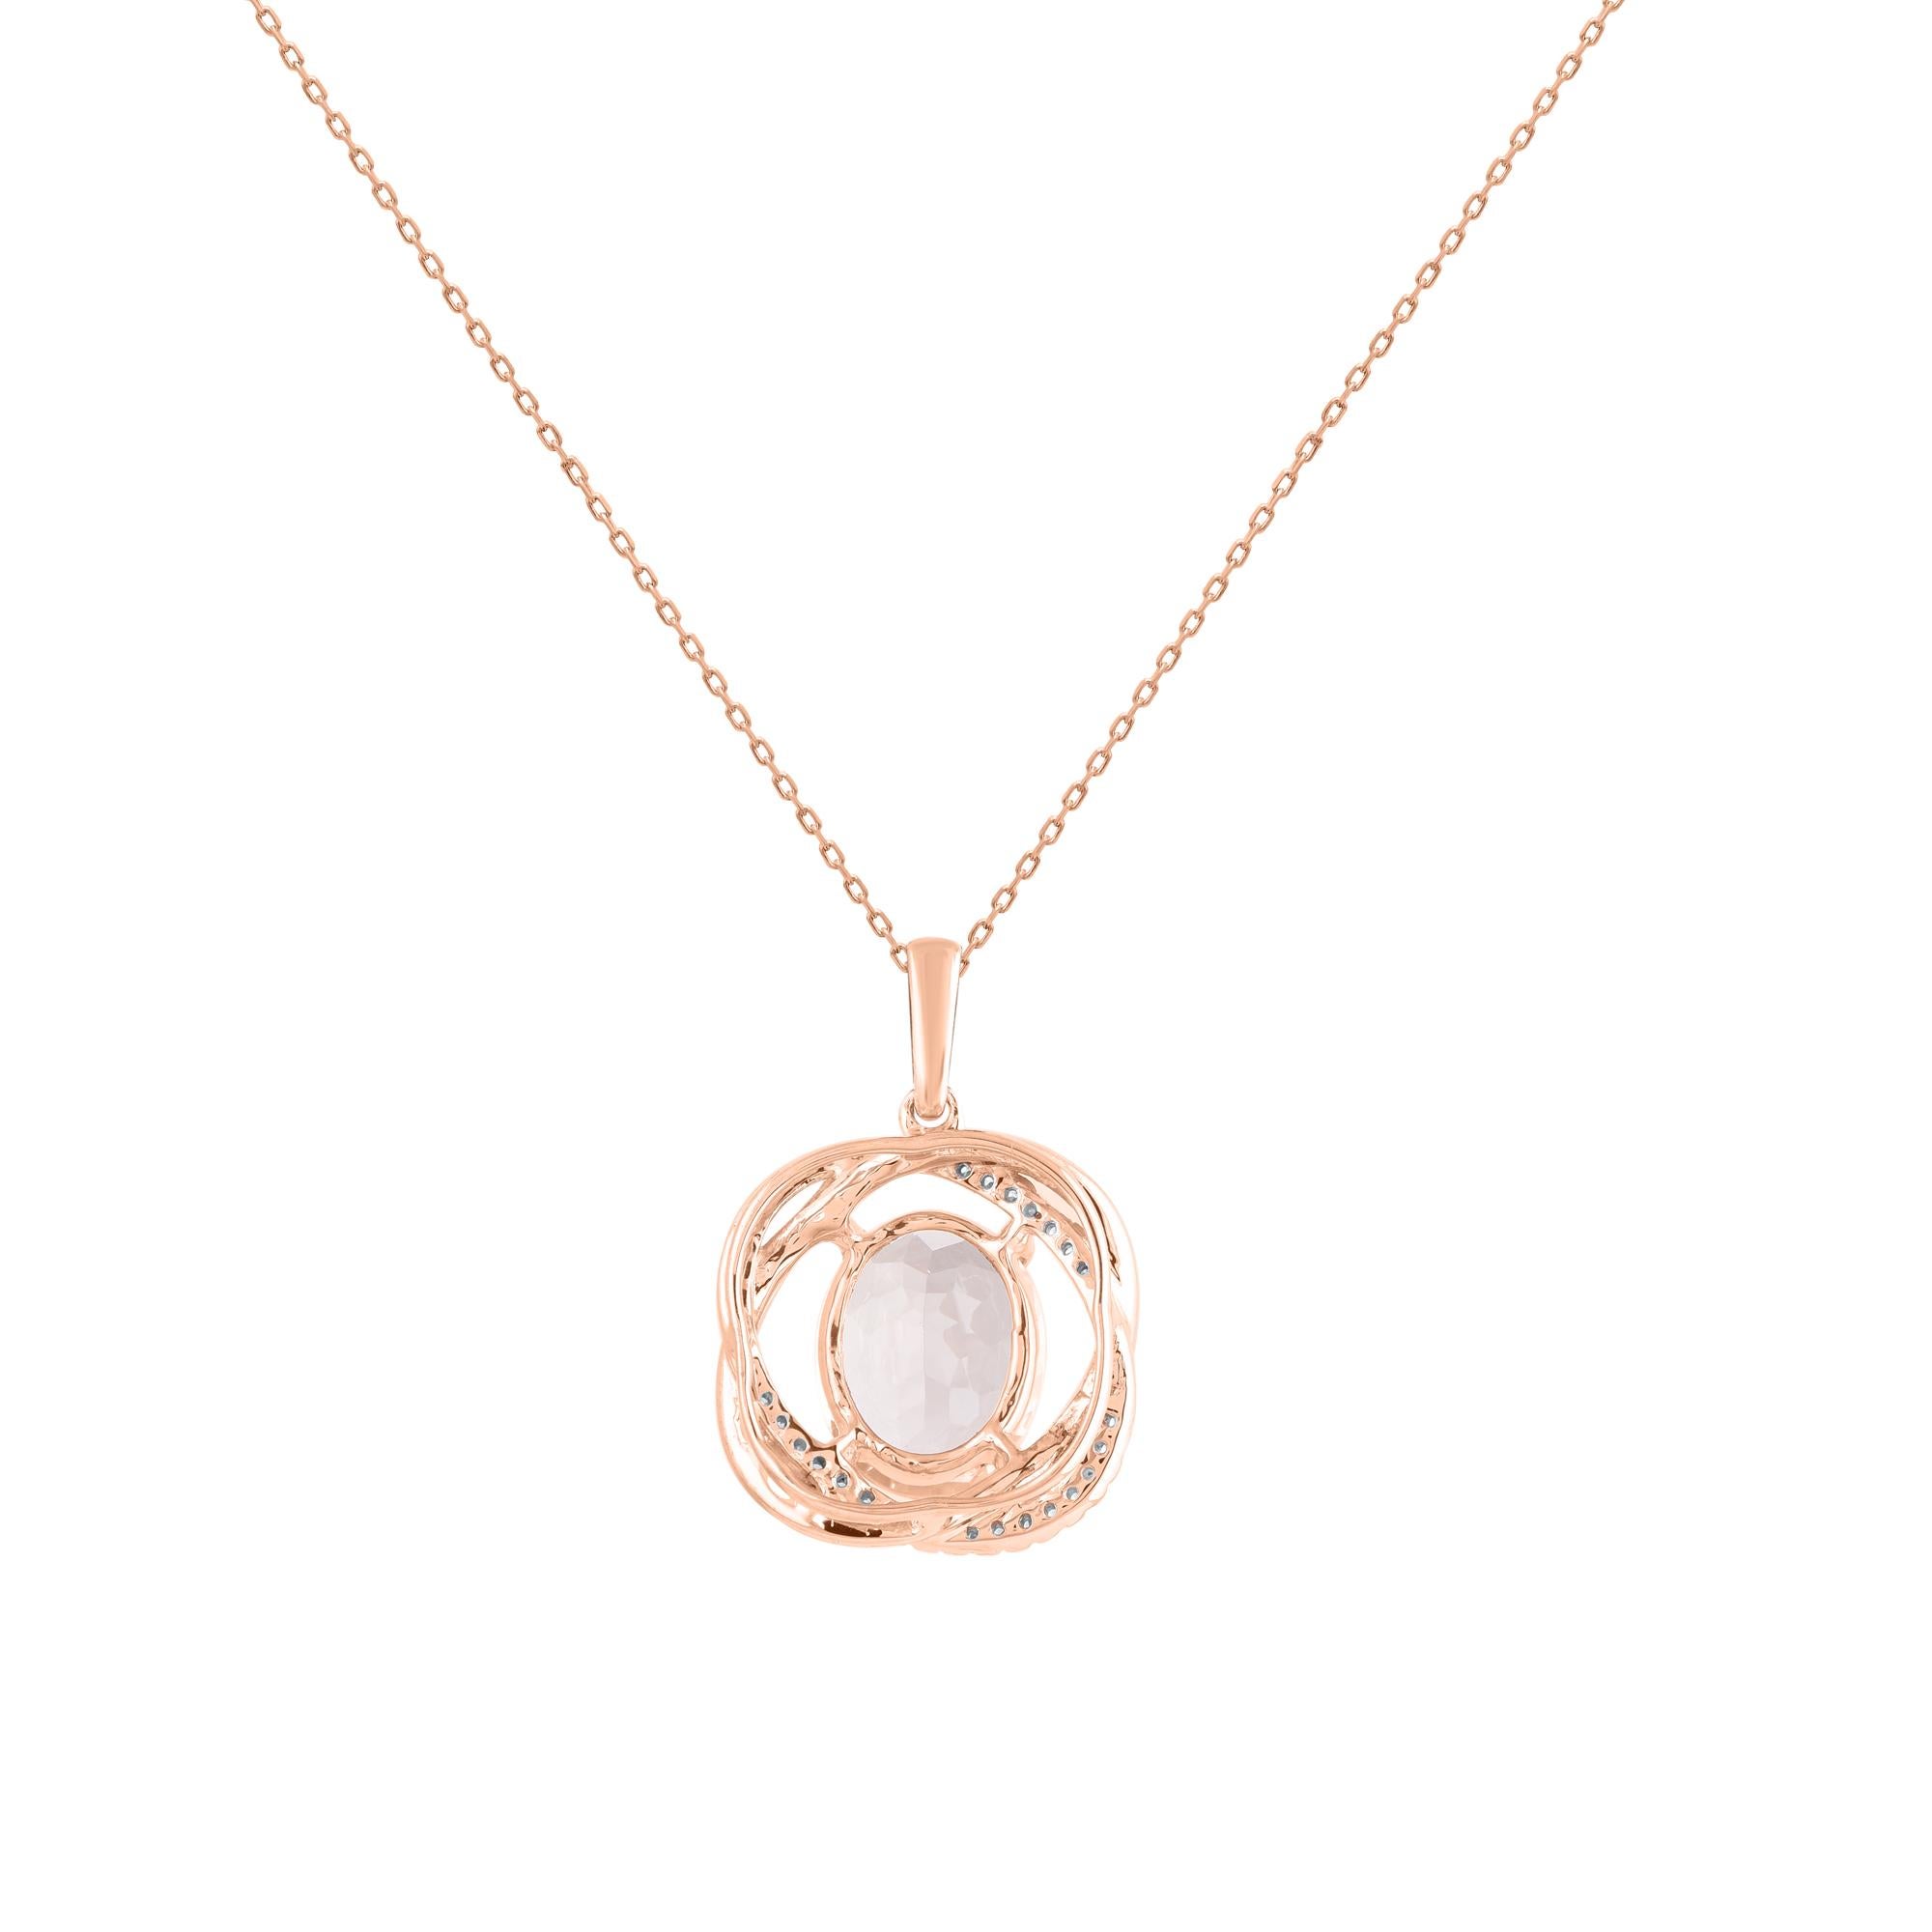 Modern TJD 0.12 Ct Diamond and 2 Ct Oval Morganite Pendant Necklace in 14KT Rose Gold For Sale